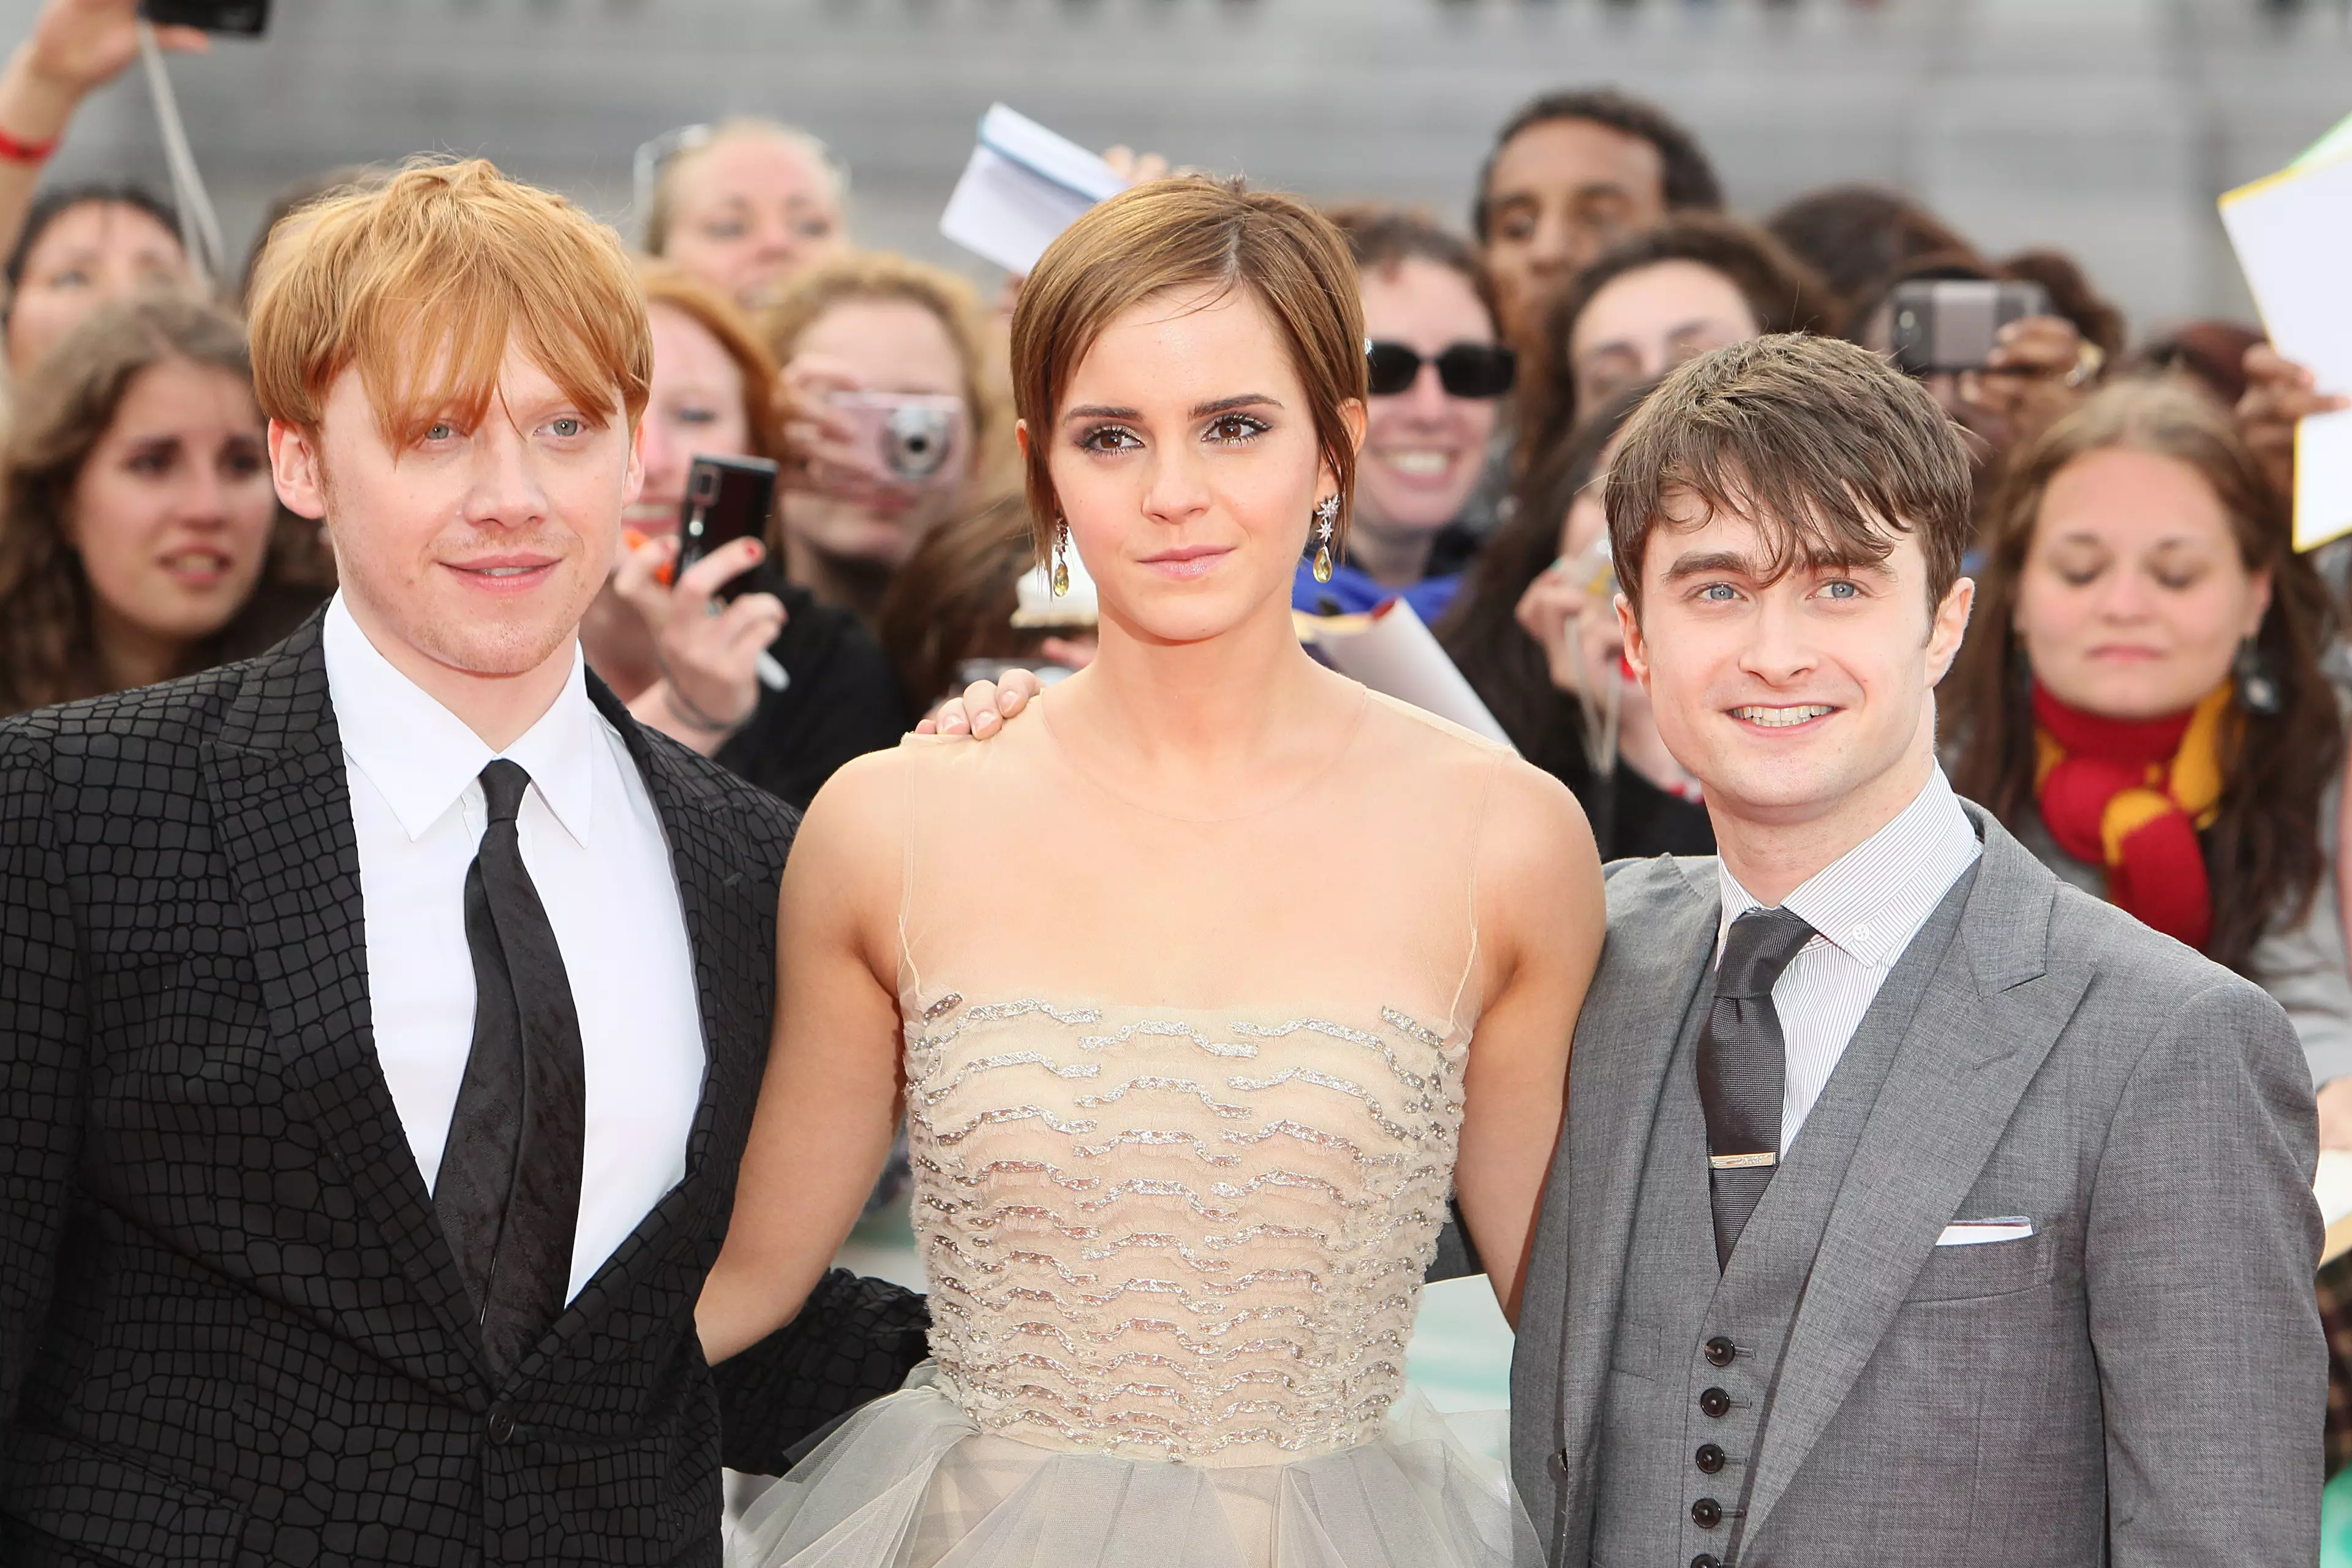 The stars of Harry Potter at the premiere of the final Harry Potter movie in 2011. (